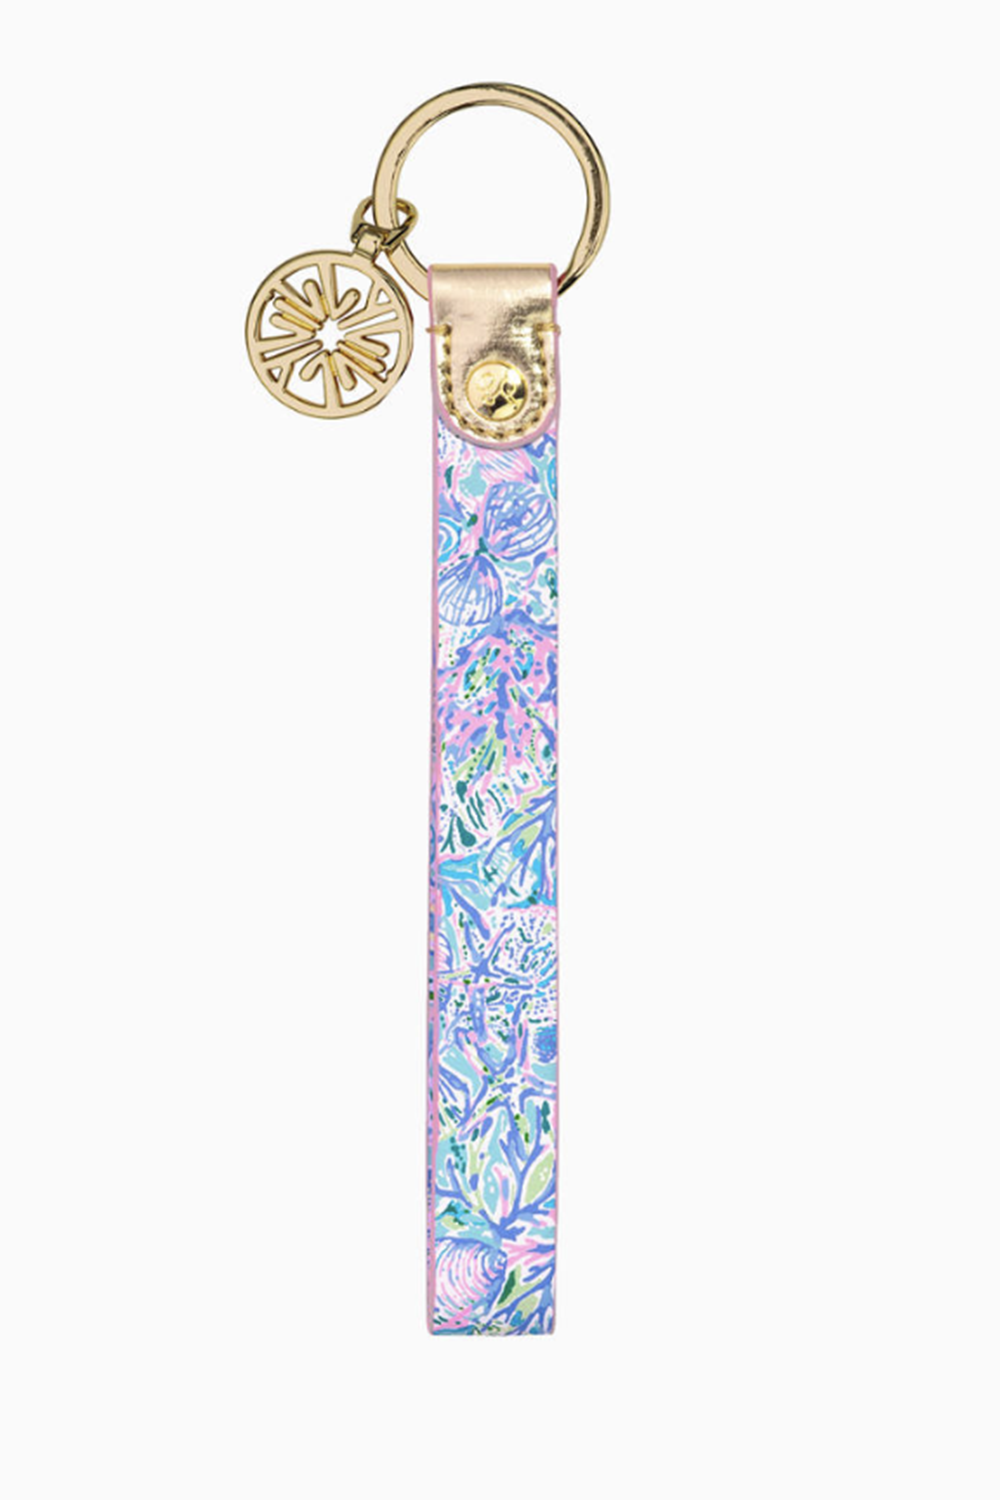 Lilly Strap Keychain - Soileil it on Me